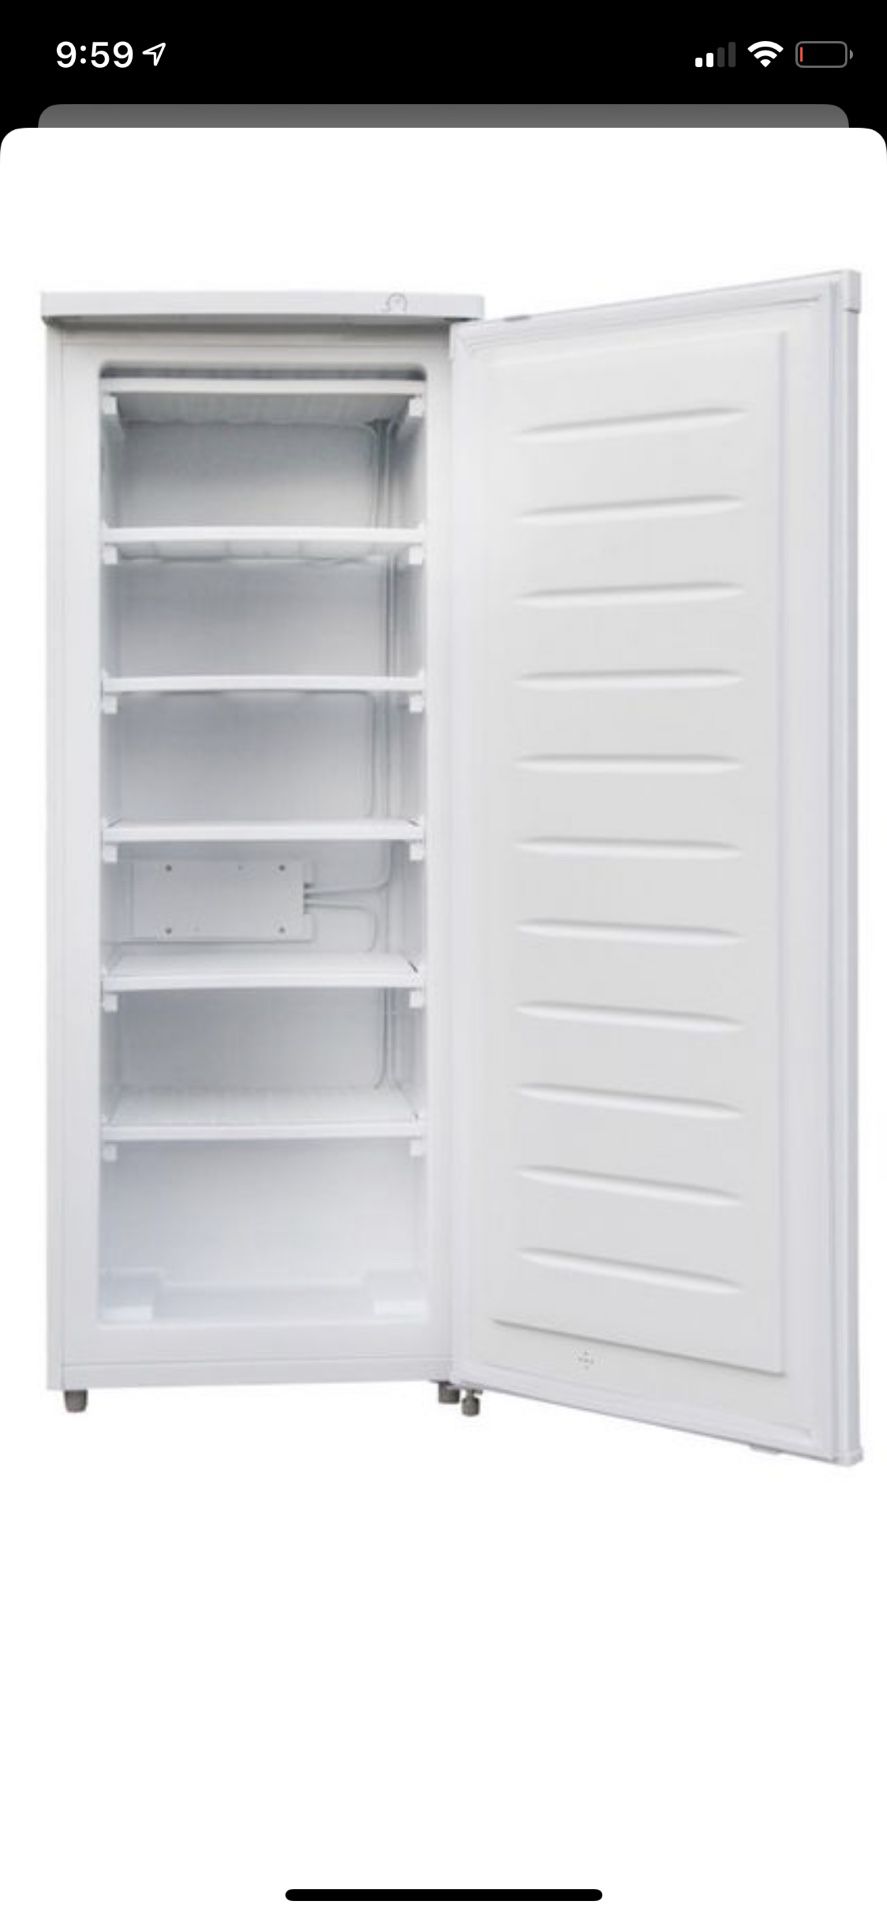 New freezer Upright Freezer (6.5 cu. ft.) is a space-saving, small upright freezer. It is the perfect fit for the garage, dorm or basement and can ho